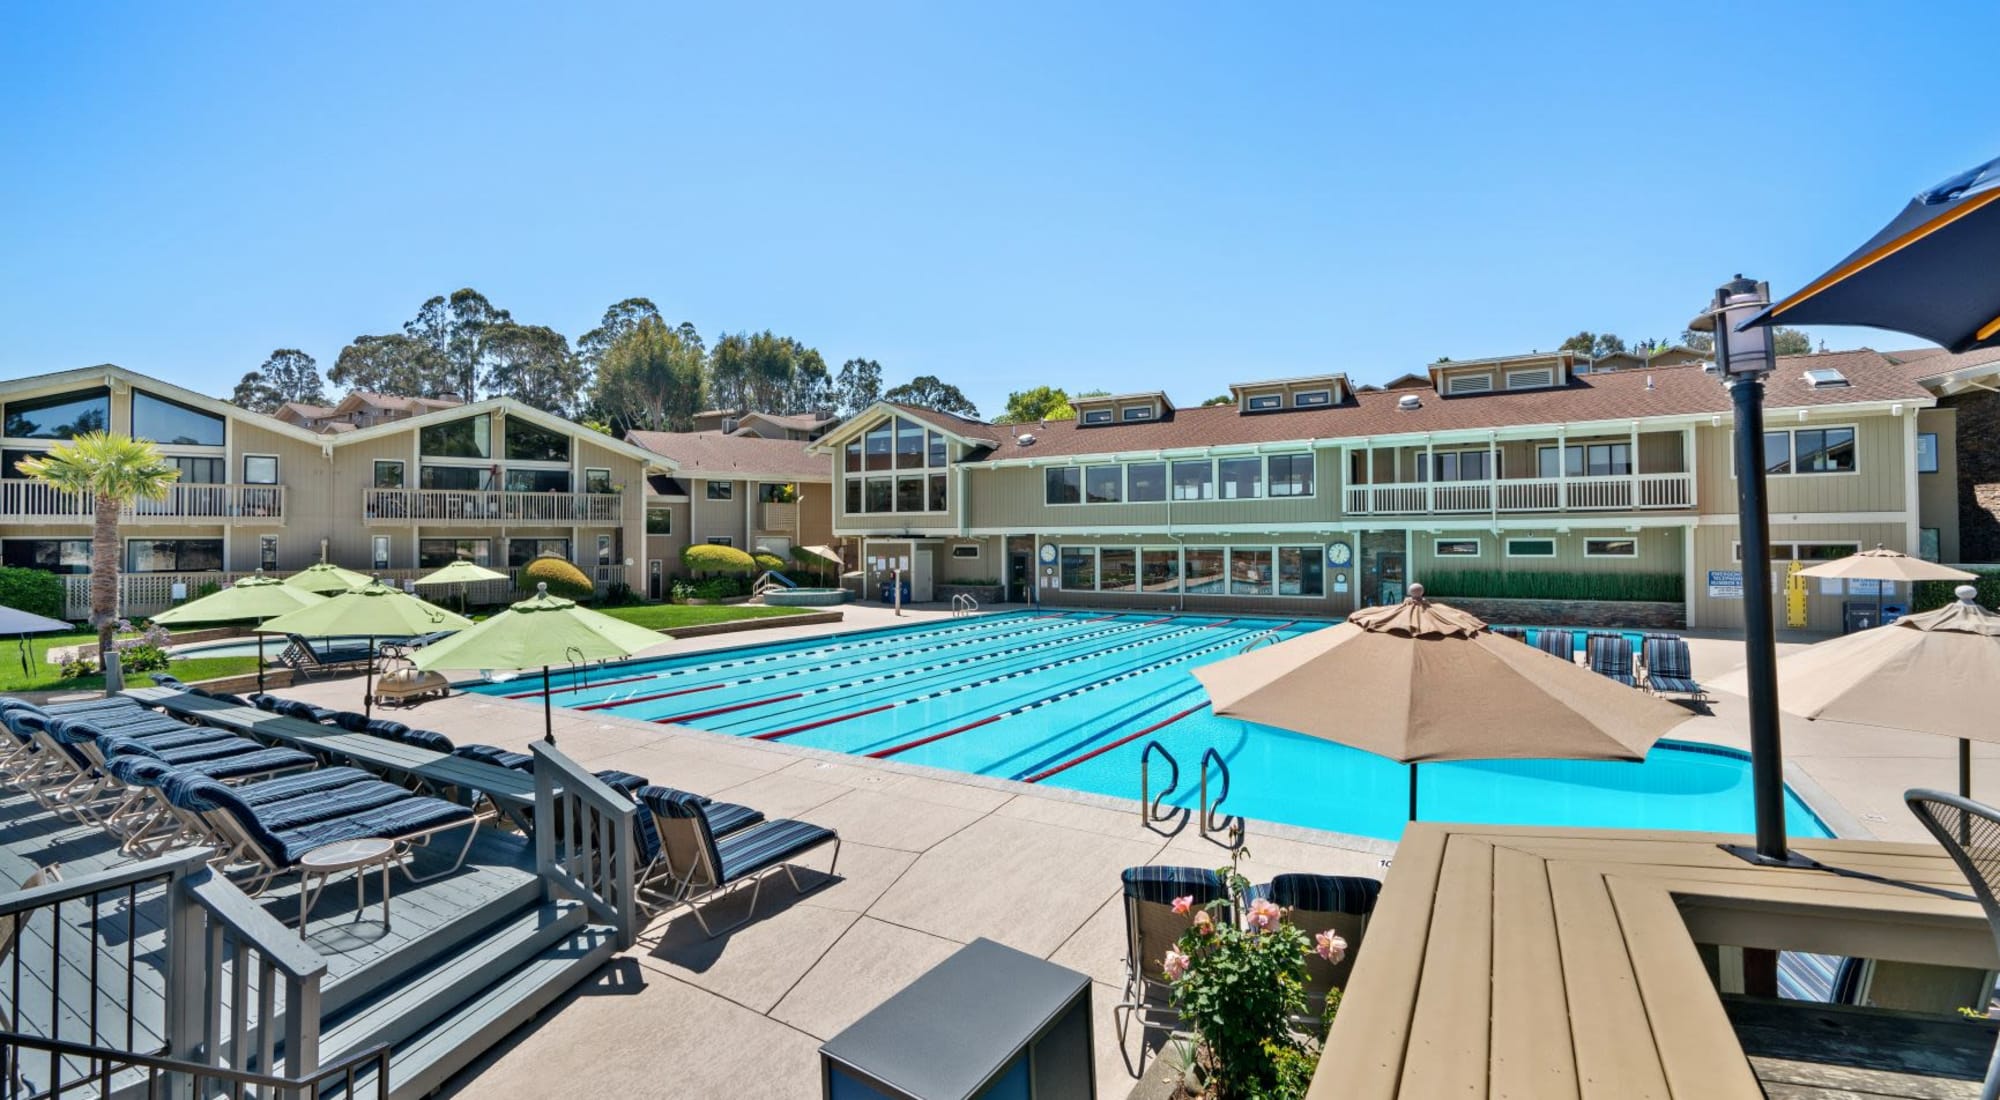 Amenities at Harbor Point Apartments in Mill Valley, California